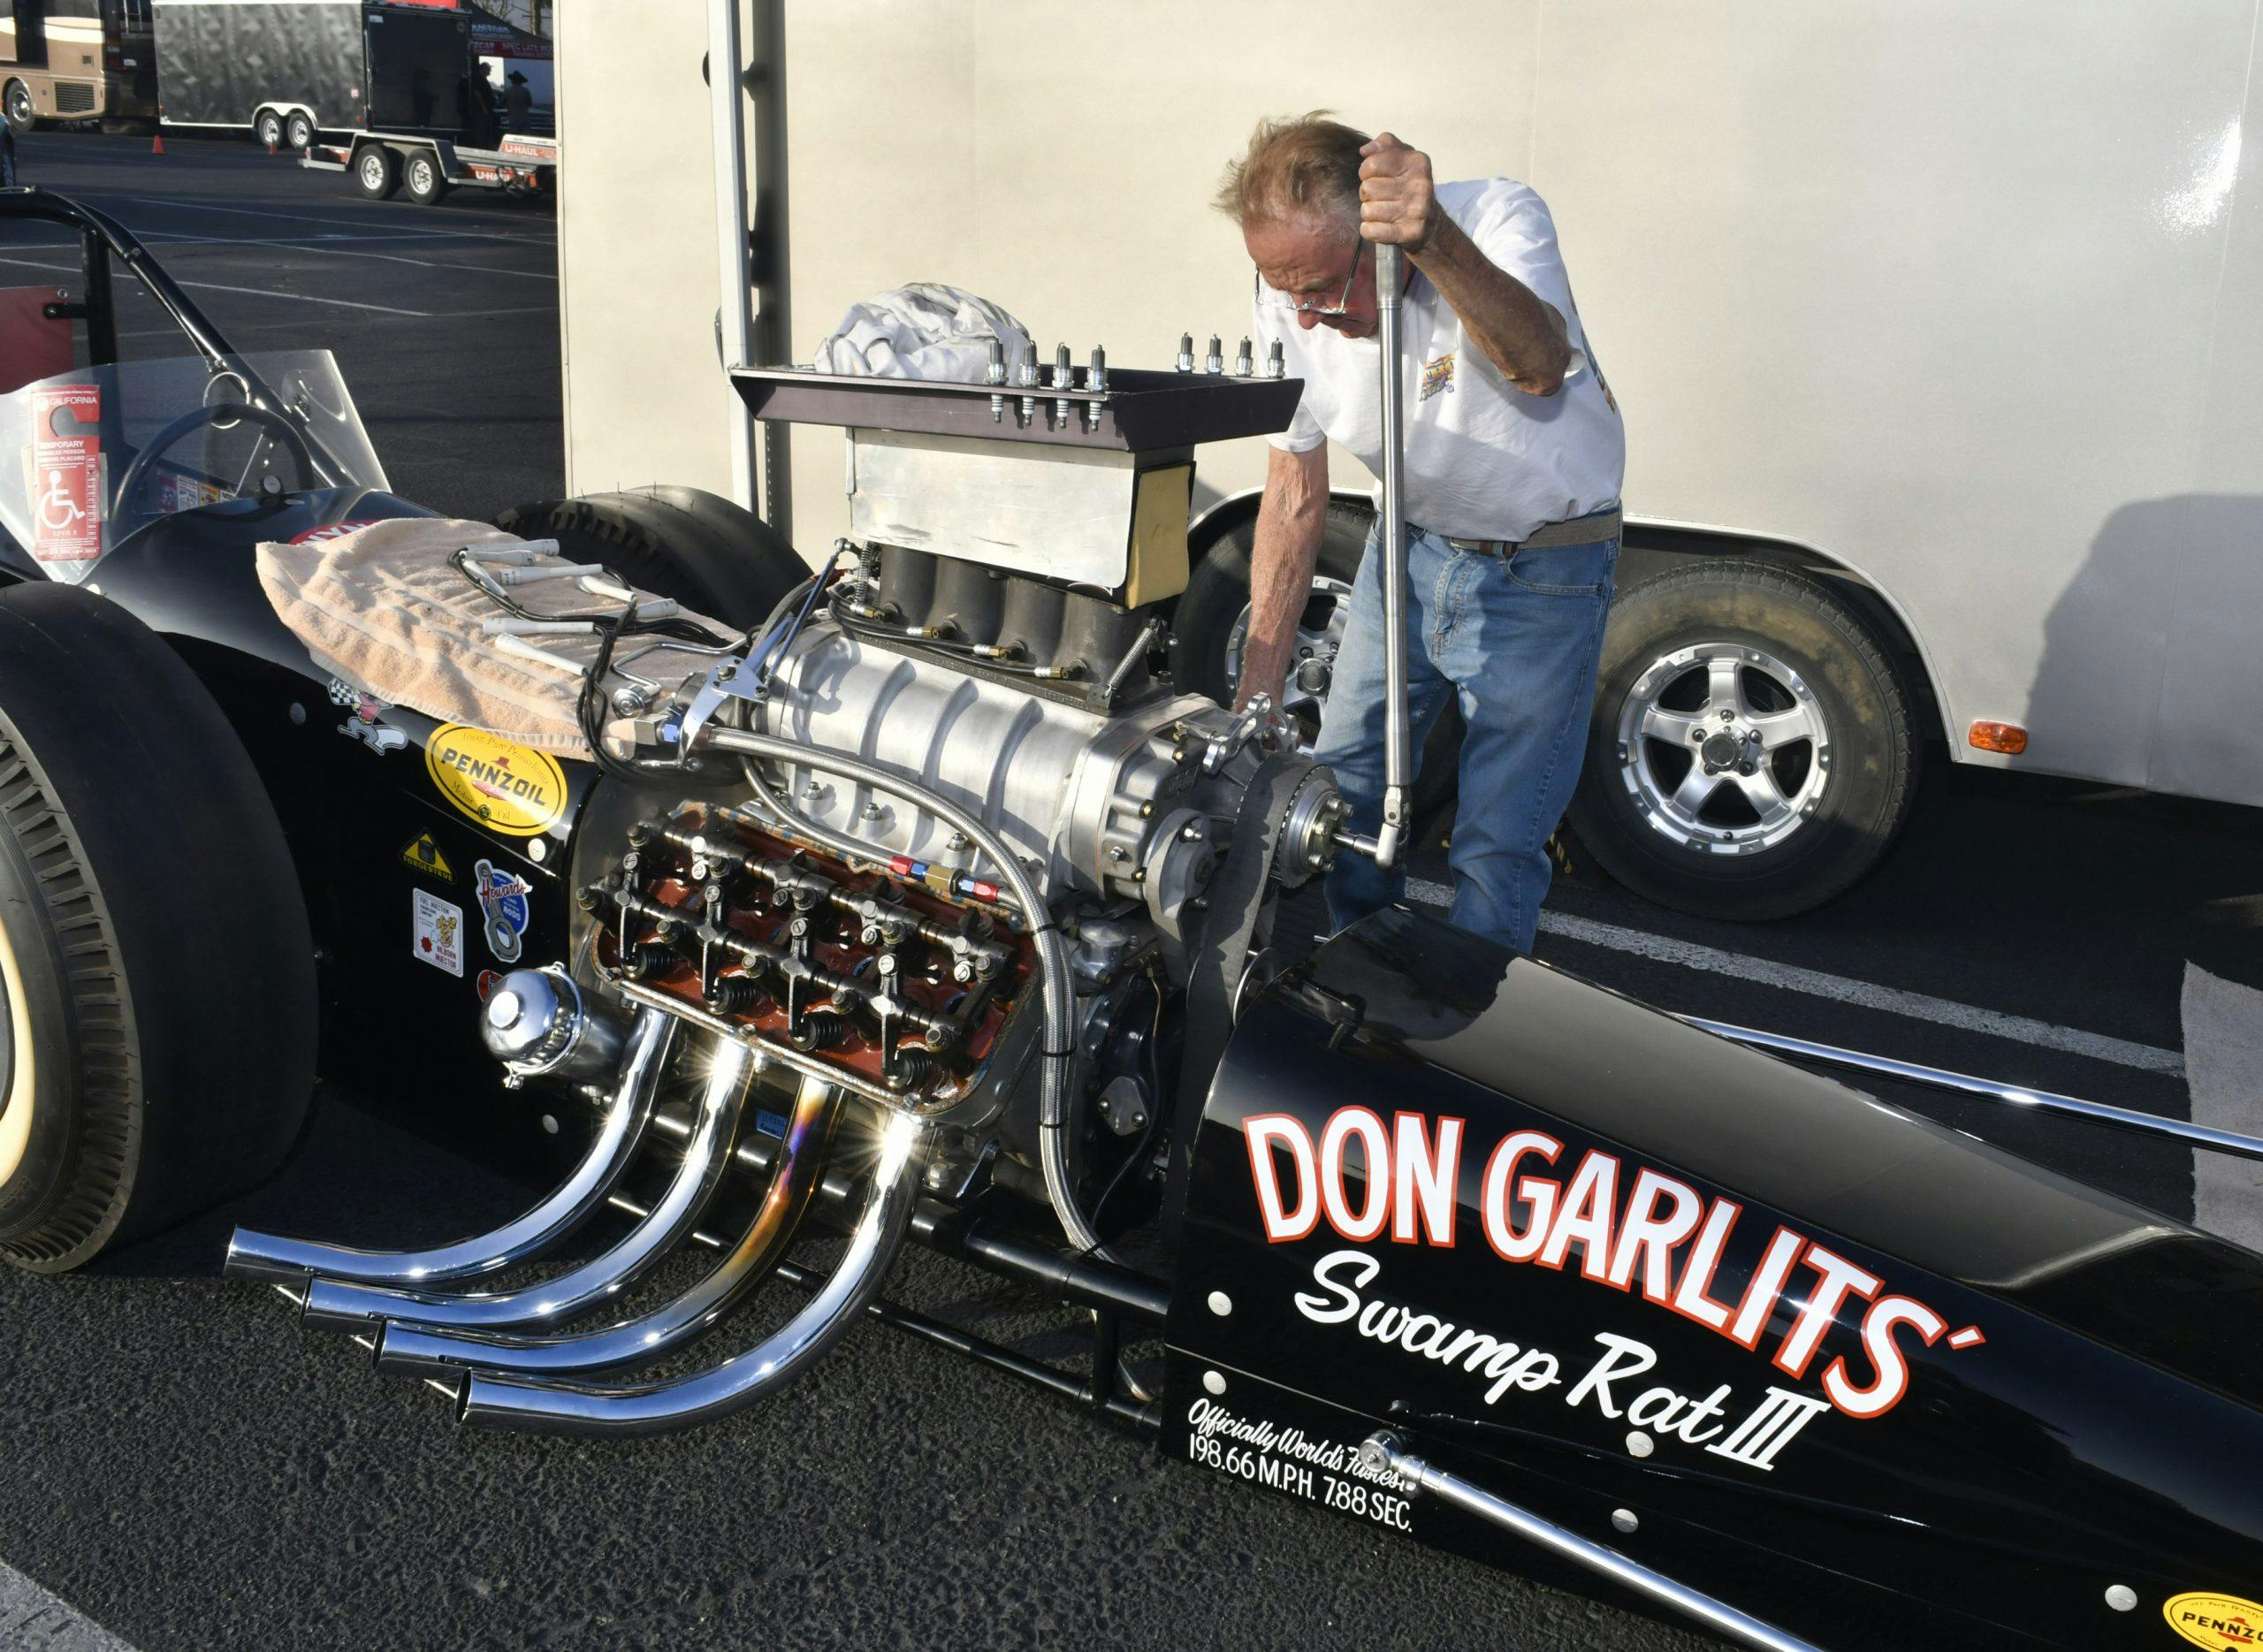 Sonny Messner wrenching action